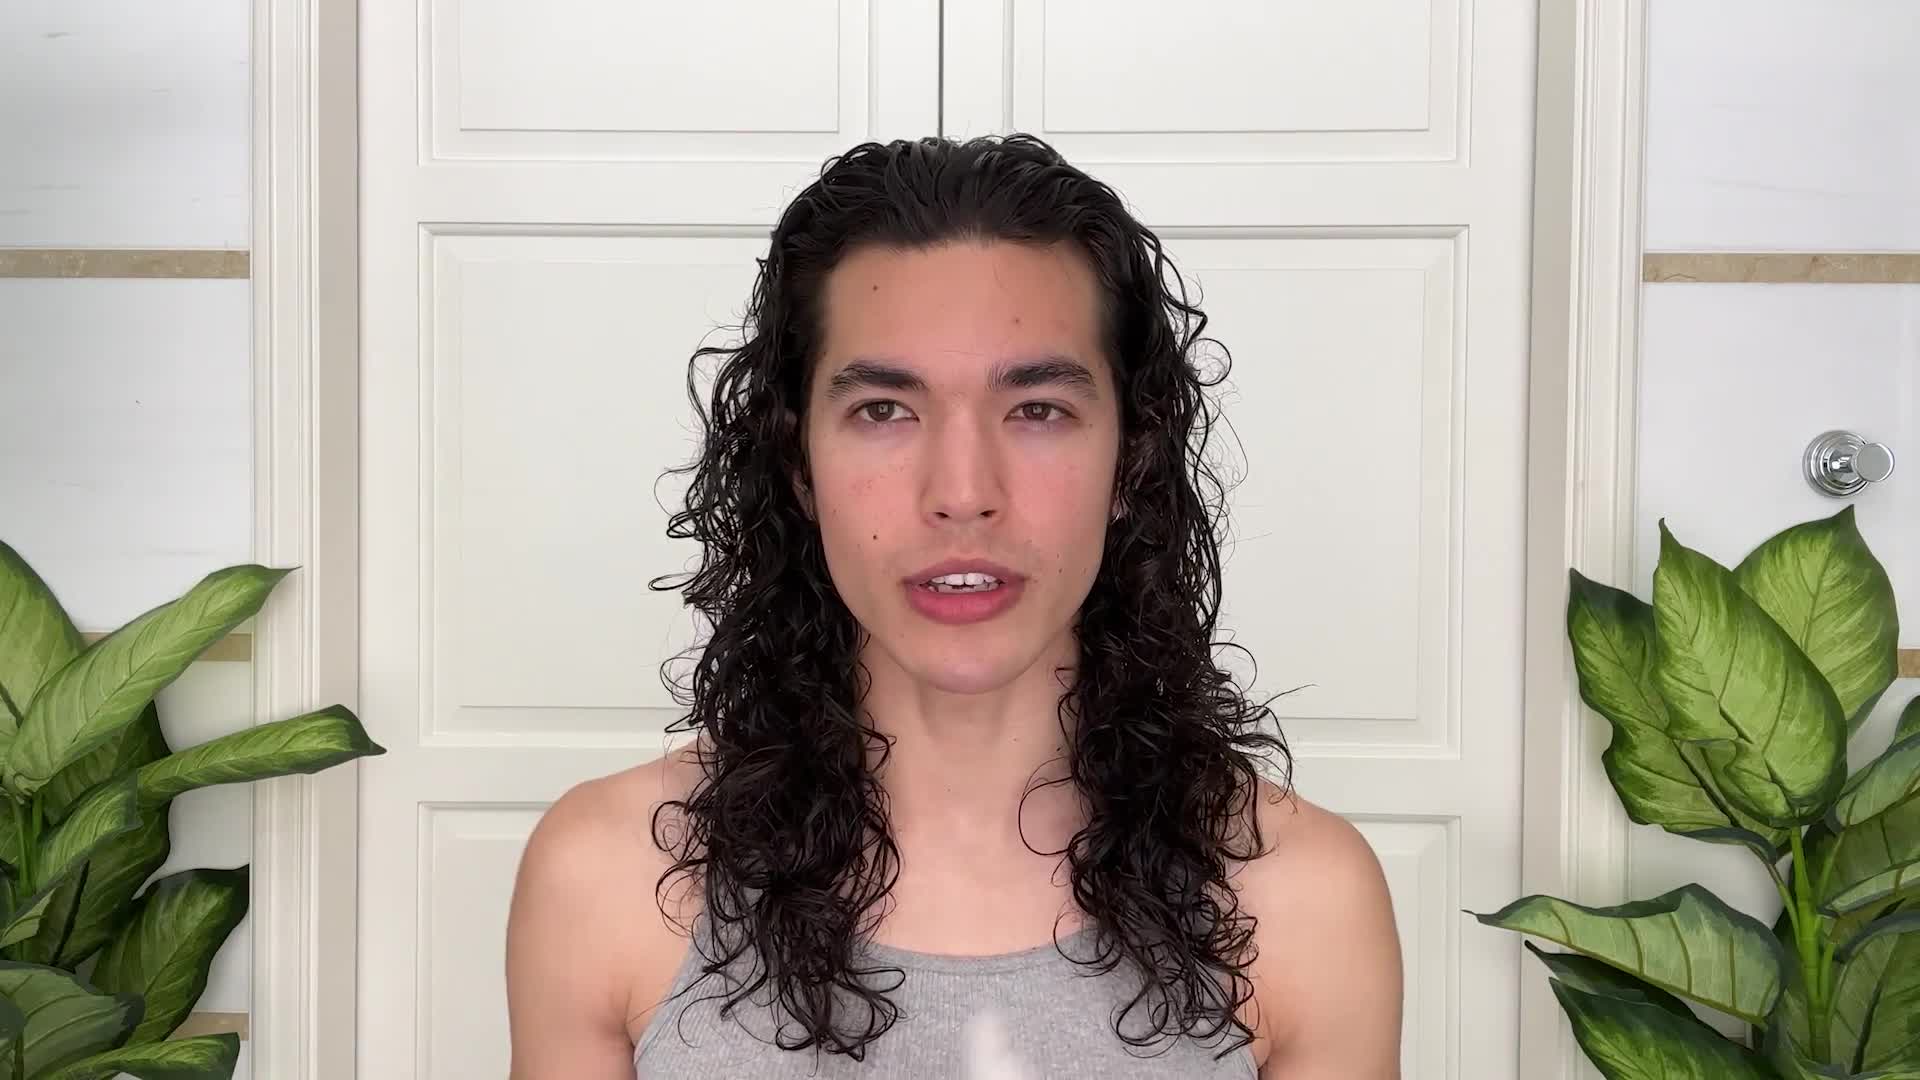 Step skins. Conan Gray SUPERCACHE. Conan Gray’s Guide to curly hair and 3-Step Skin Care.